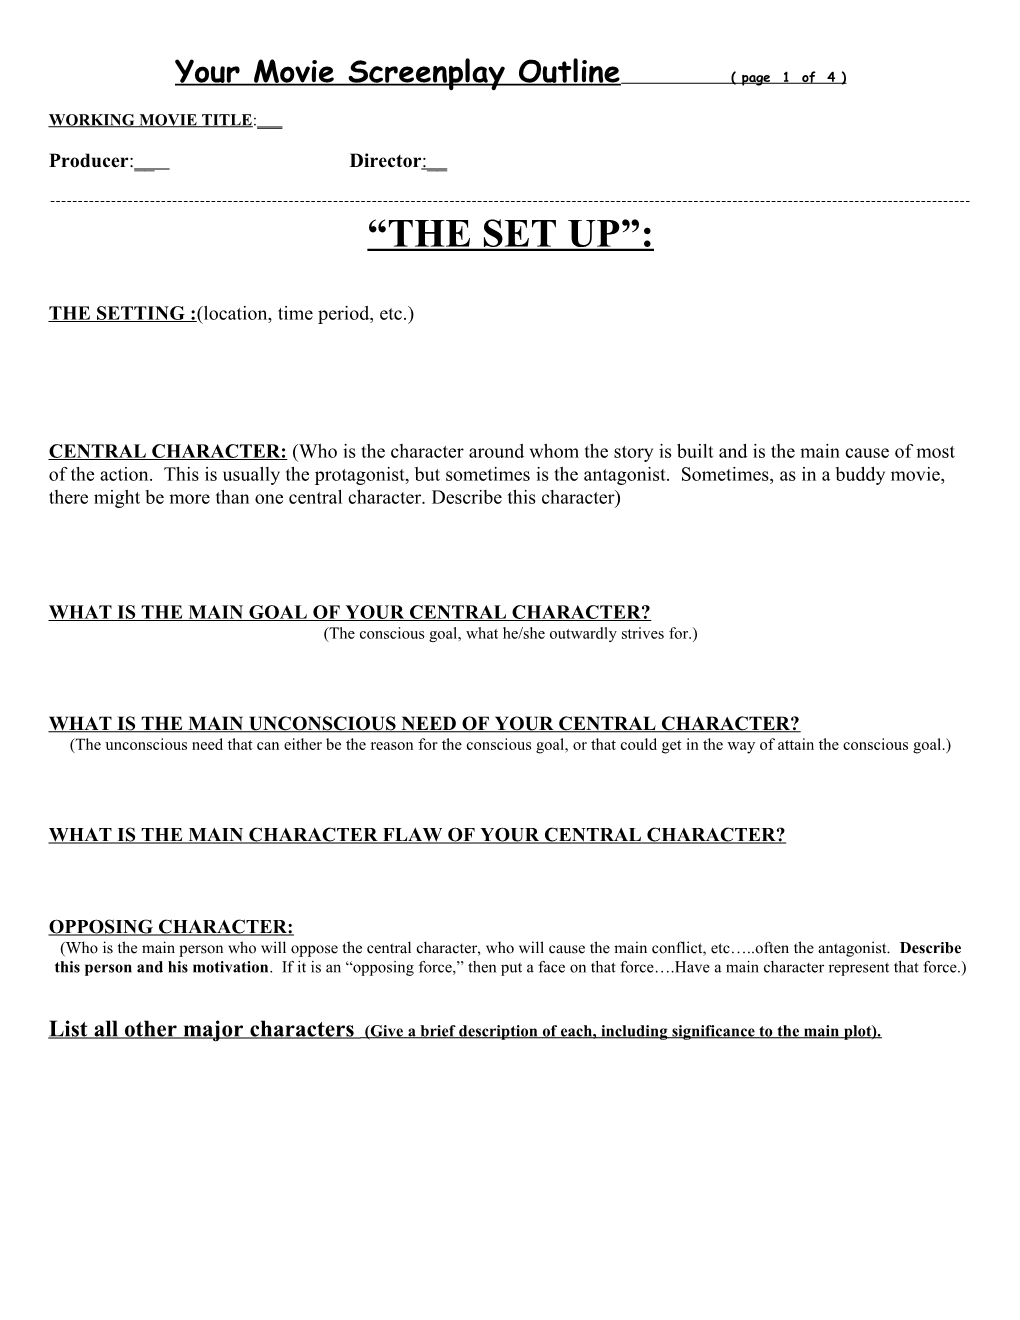 Your Movie Screenplay Outline ( Page 1 of 4 )